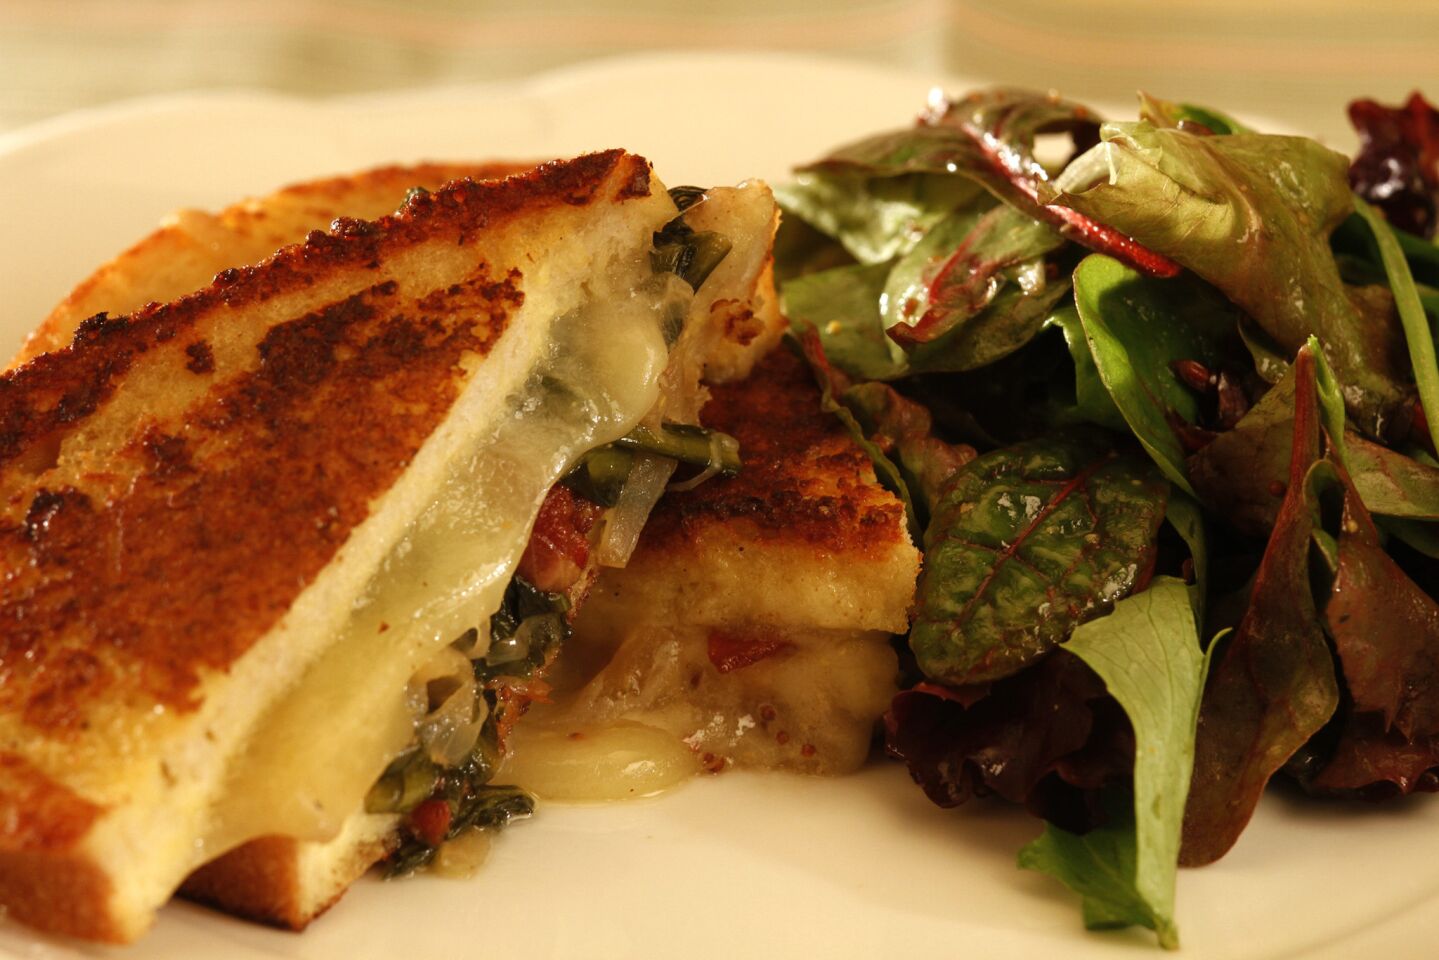 This savory take on the comfort food -- stuffed with bacon, Gruyere cheese and dandelion greens and pan-fried to ooey-gooey perfection -- works well served any time of the day. Recipe: Savory stuffed French toast